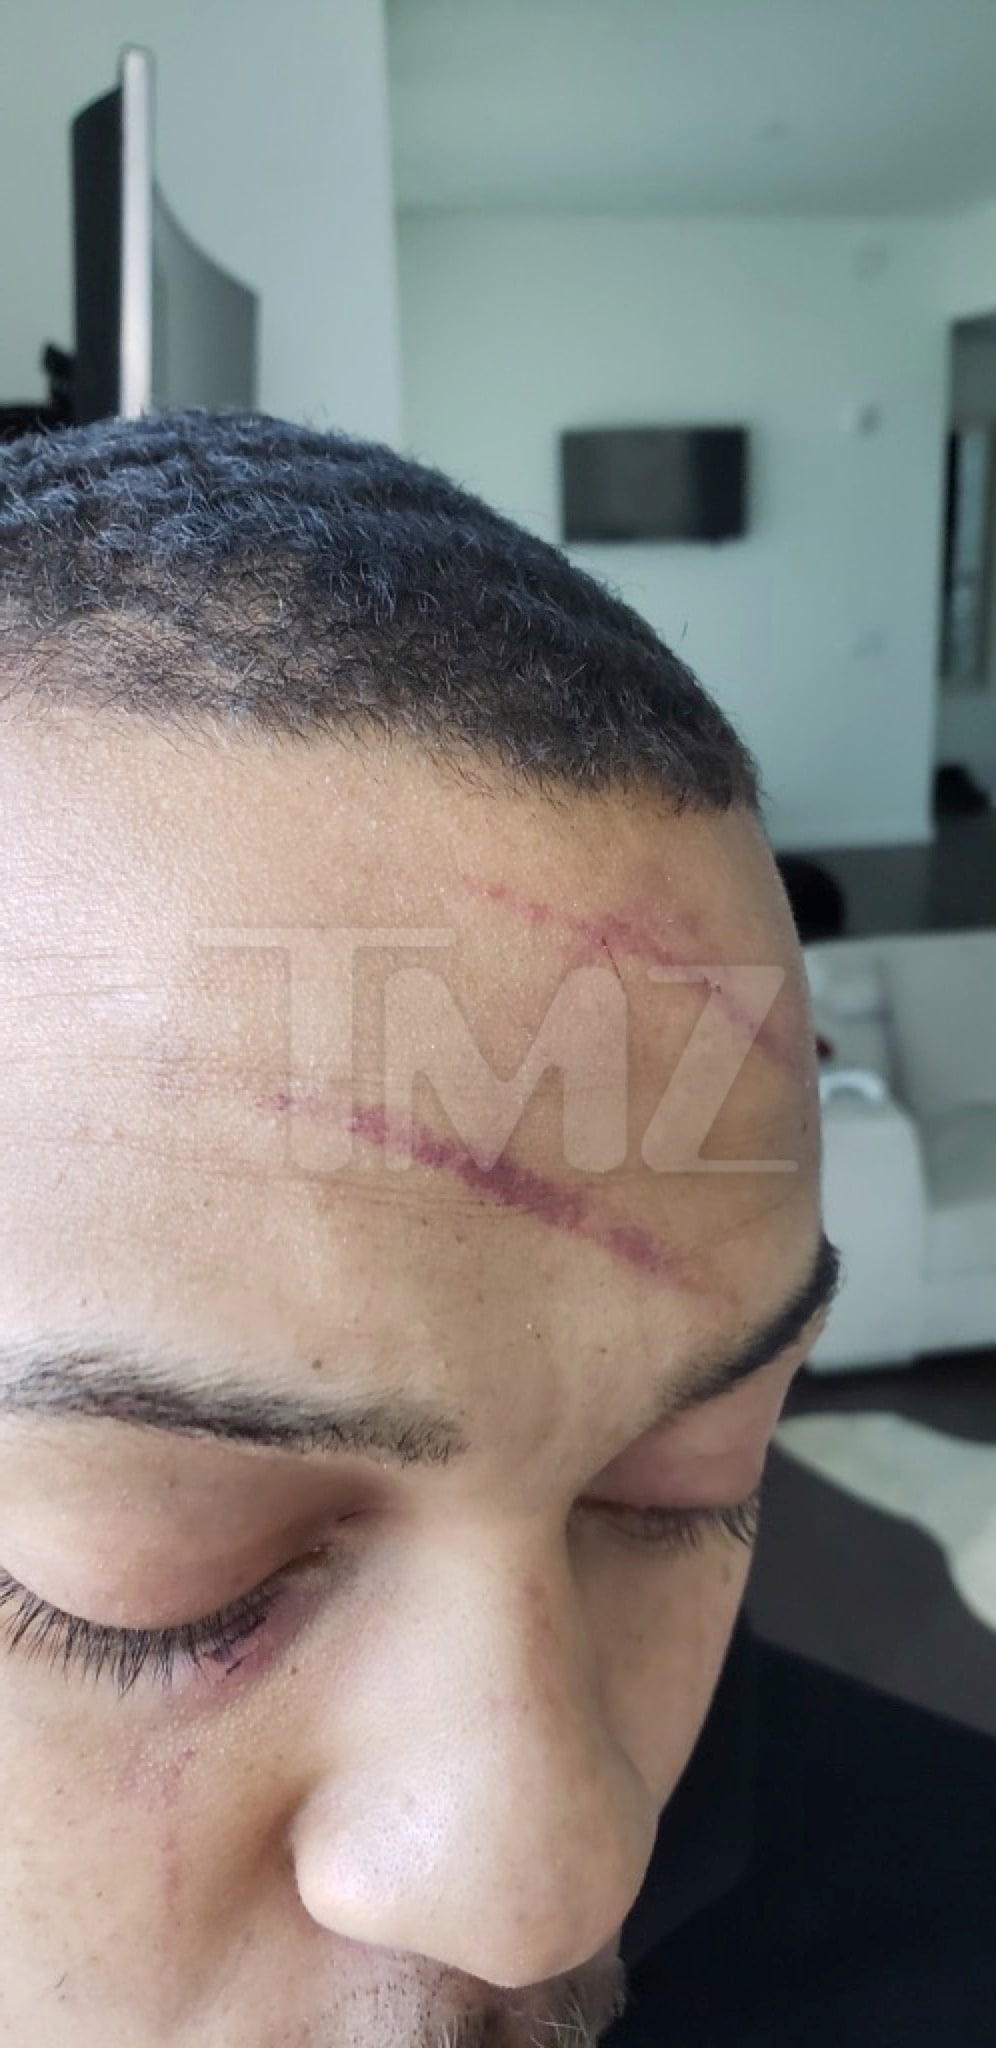 Bow Wow Domestic Violence Injuries